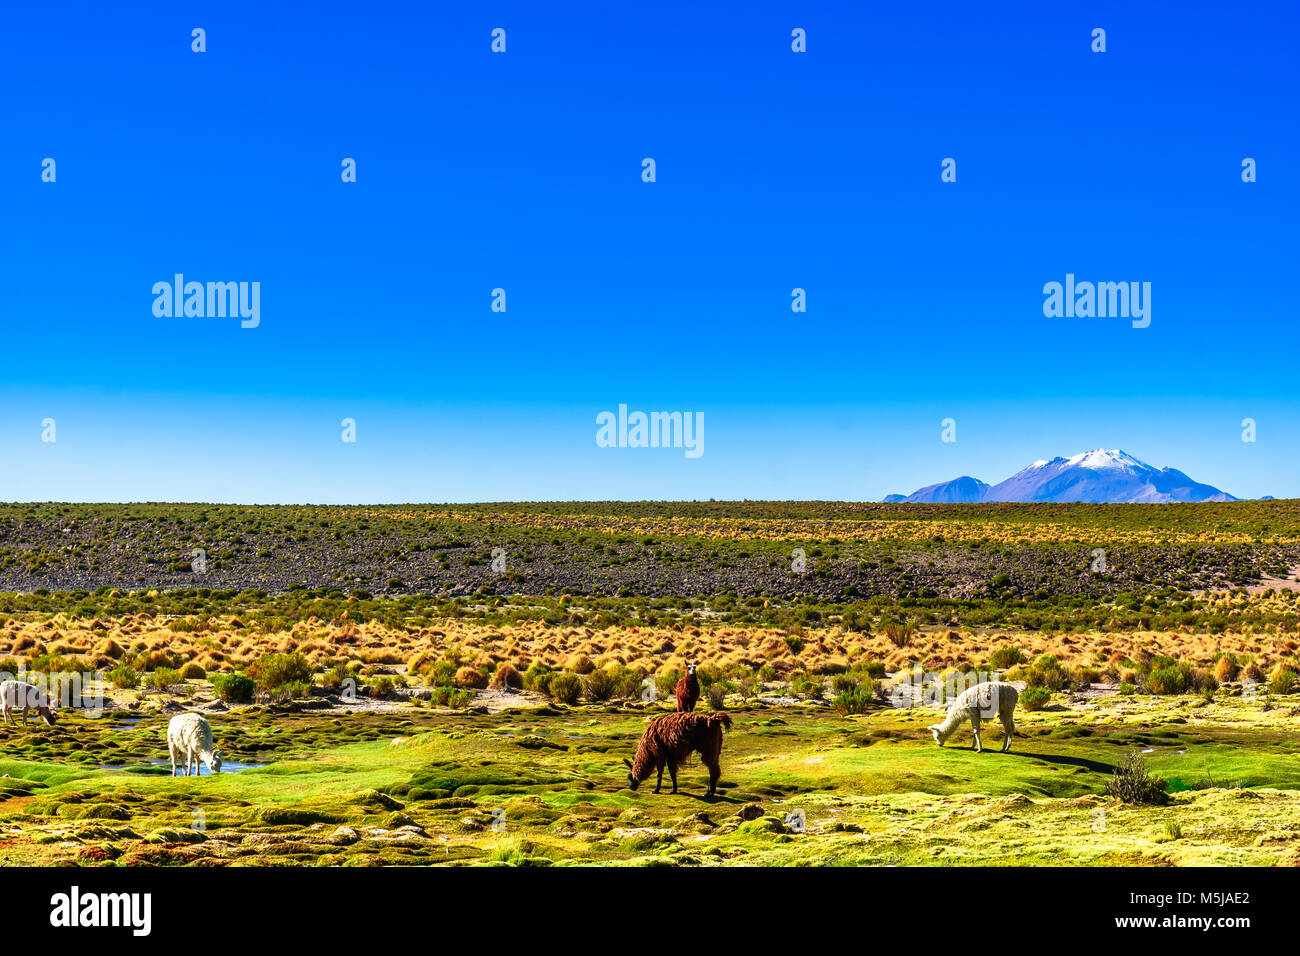 View on Llama and volcano Lascar in the Altiplano of Bolivia Stock Photo